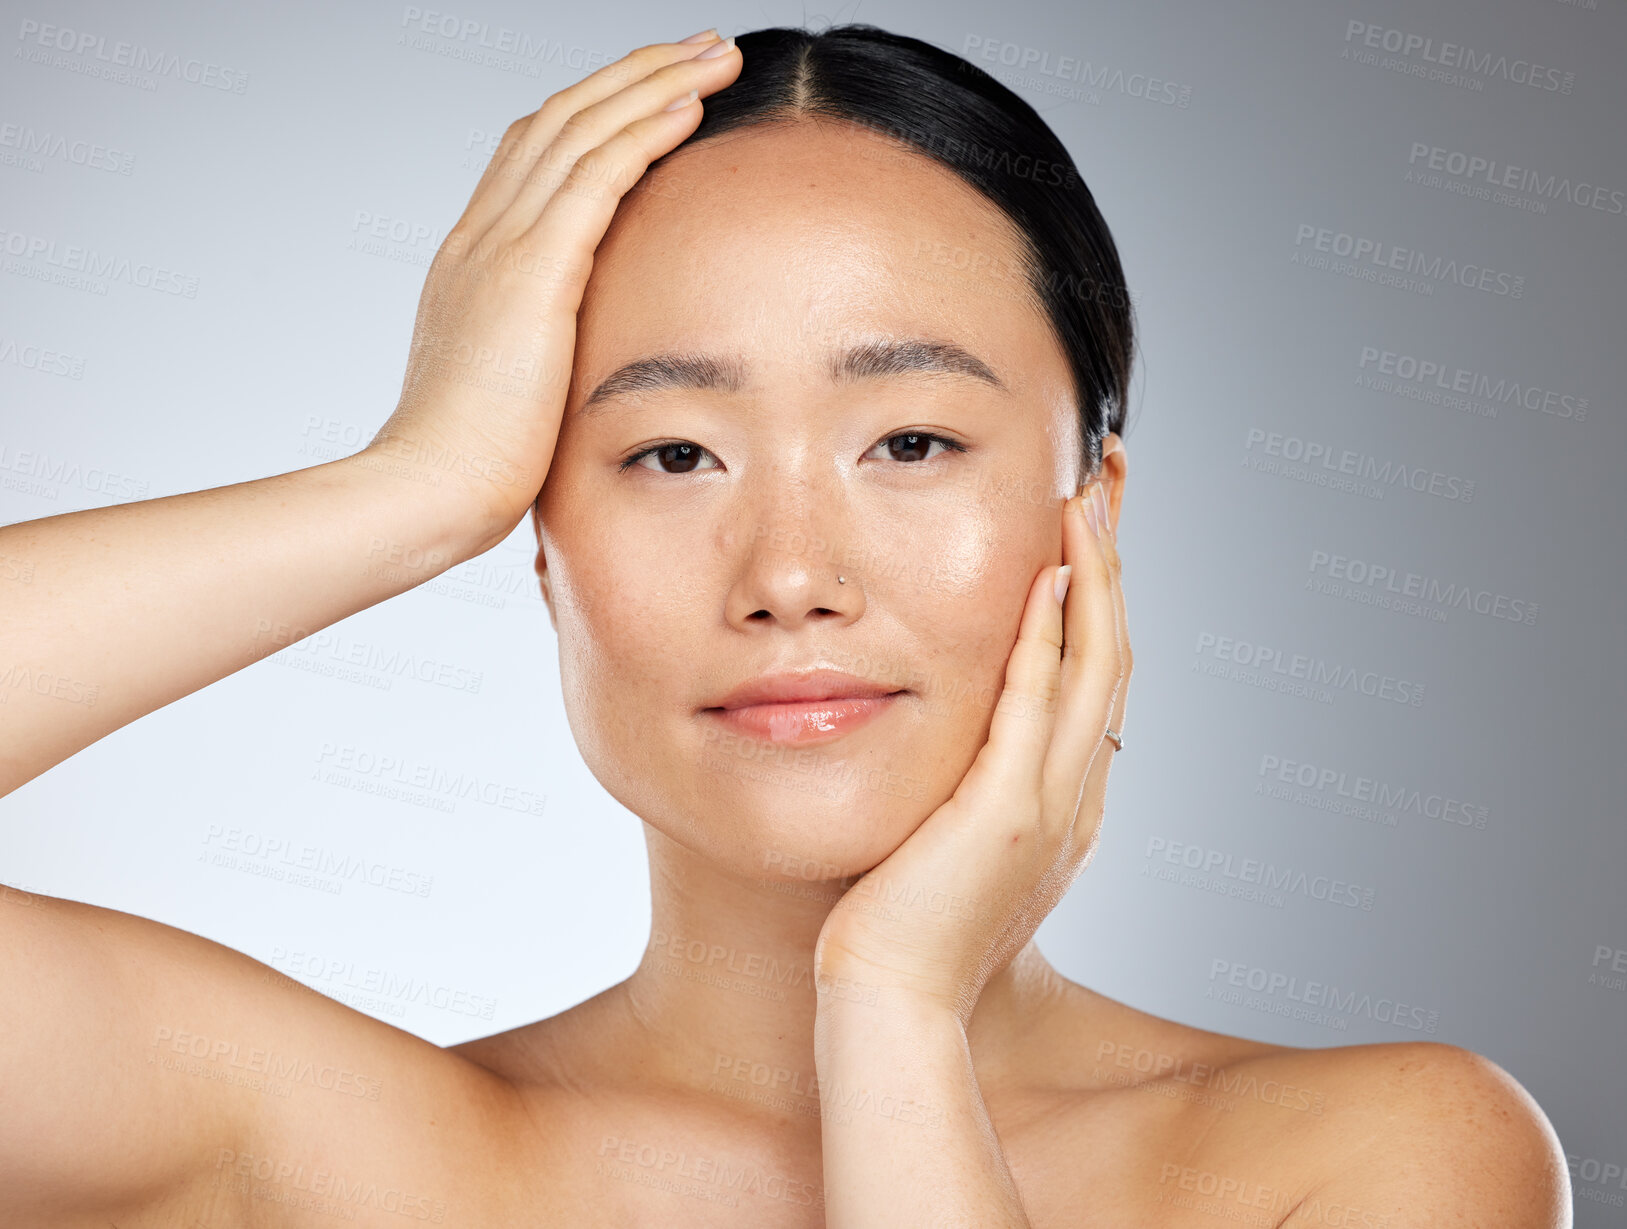 Buy stock photo Skincare, beauty and woman with facial makeup against a grey mockup studio background. Face portrait of a happy, relax and calm Asian model with peace from cosmetics, dermatology and skin wellness